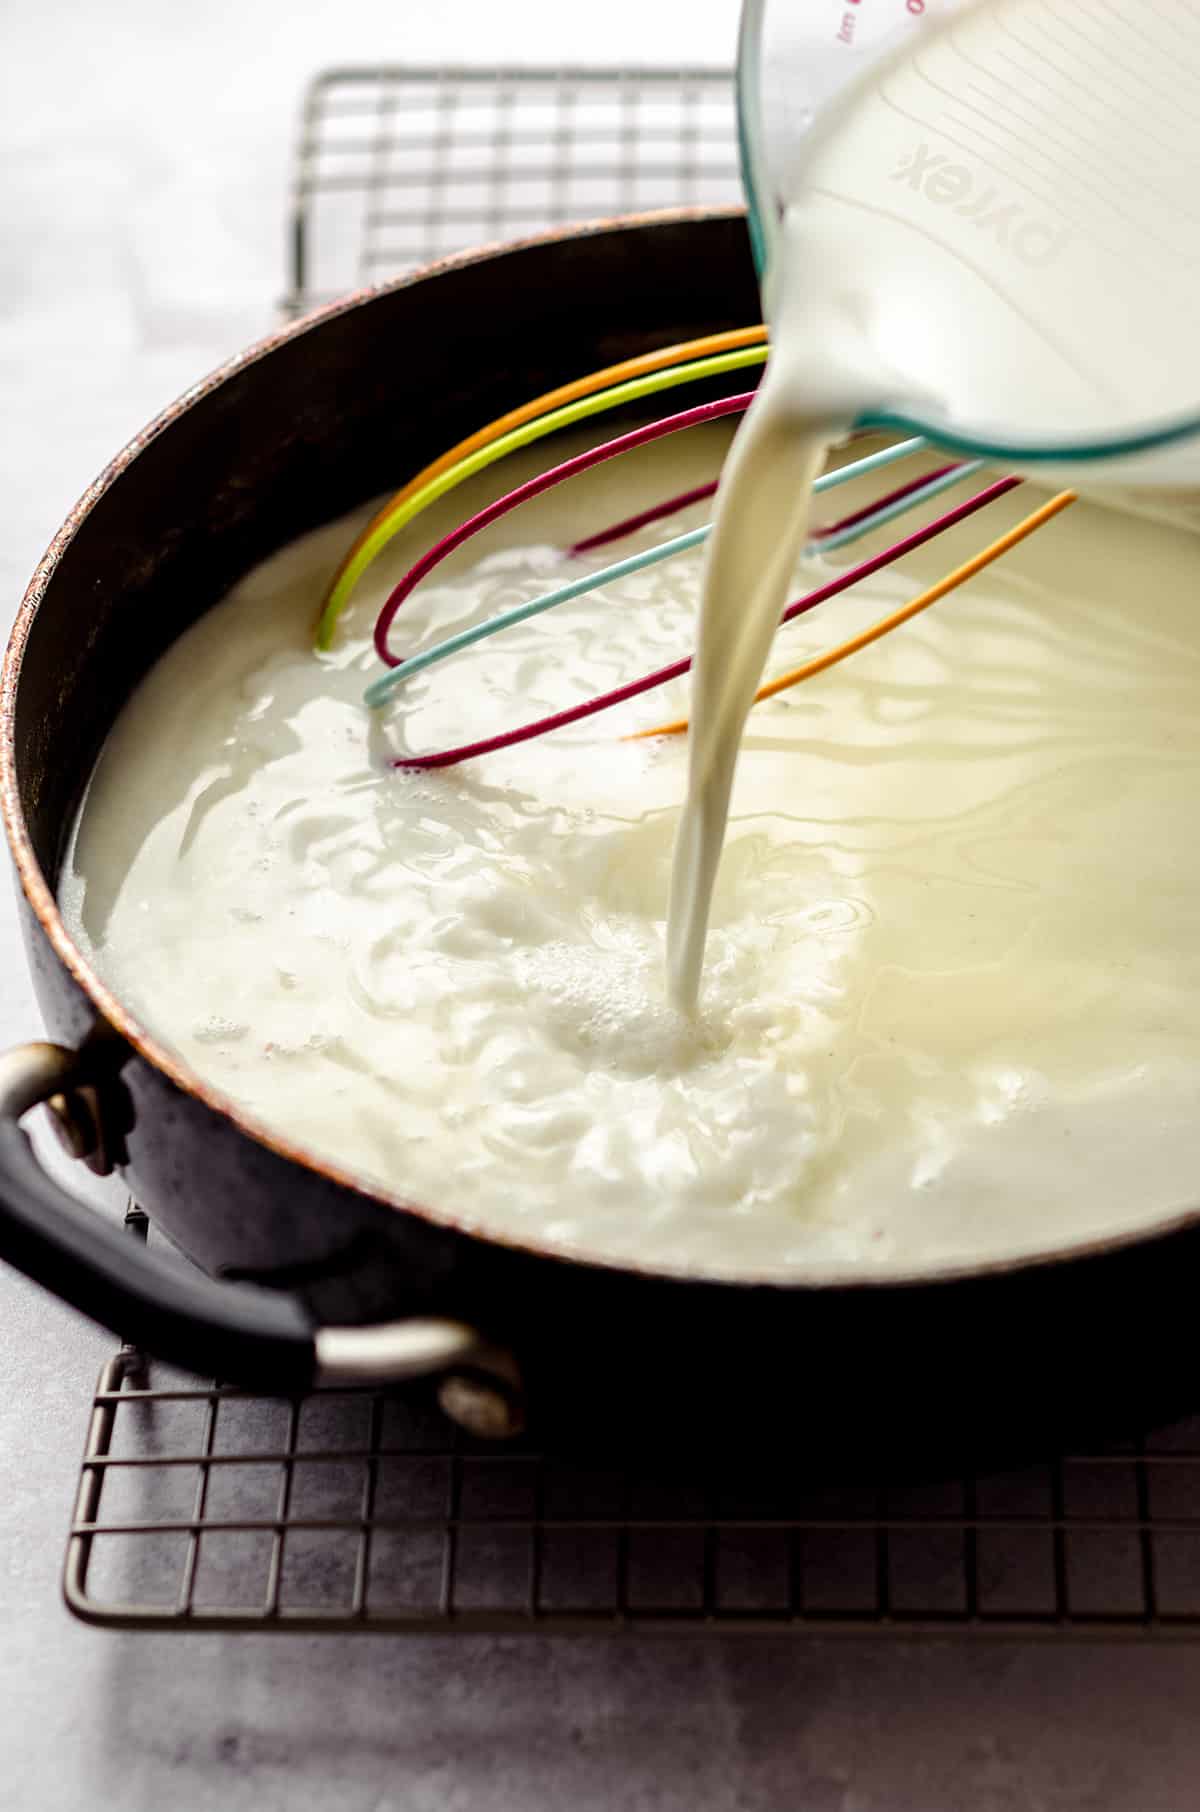 Adding milk to a saucepan with a roux, to form a thick sauce.